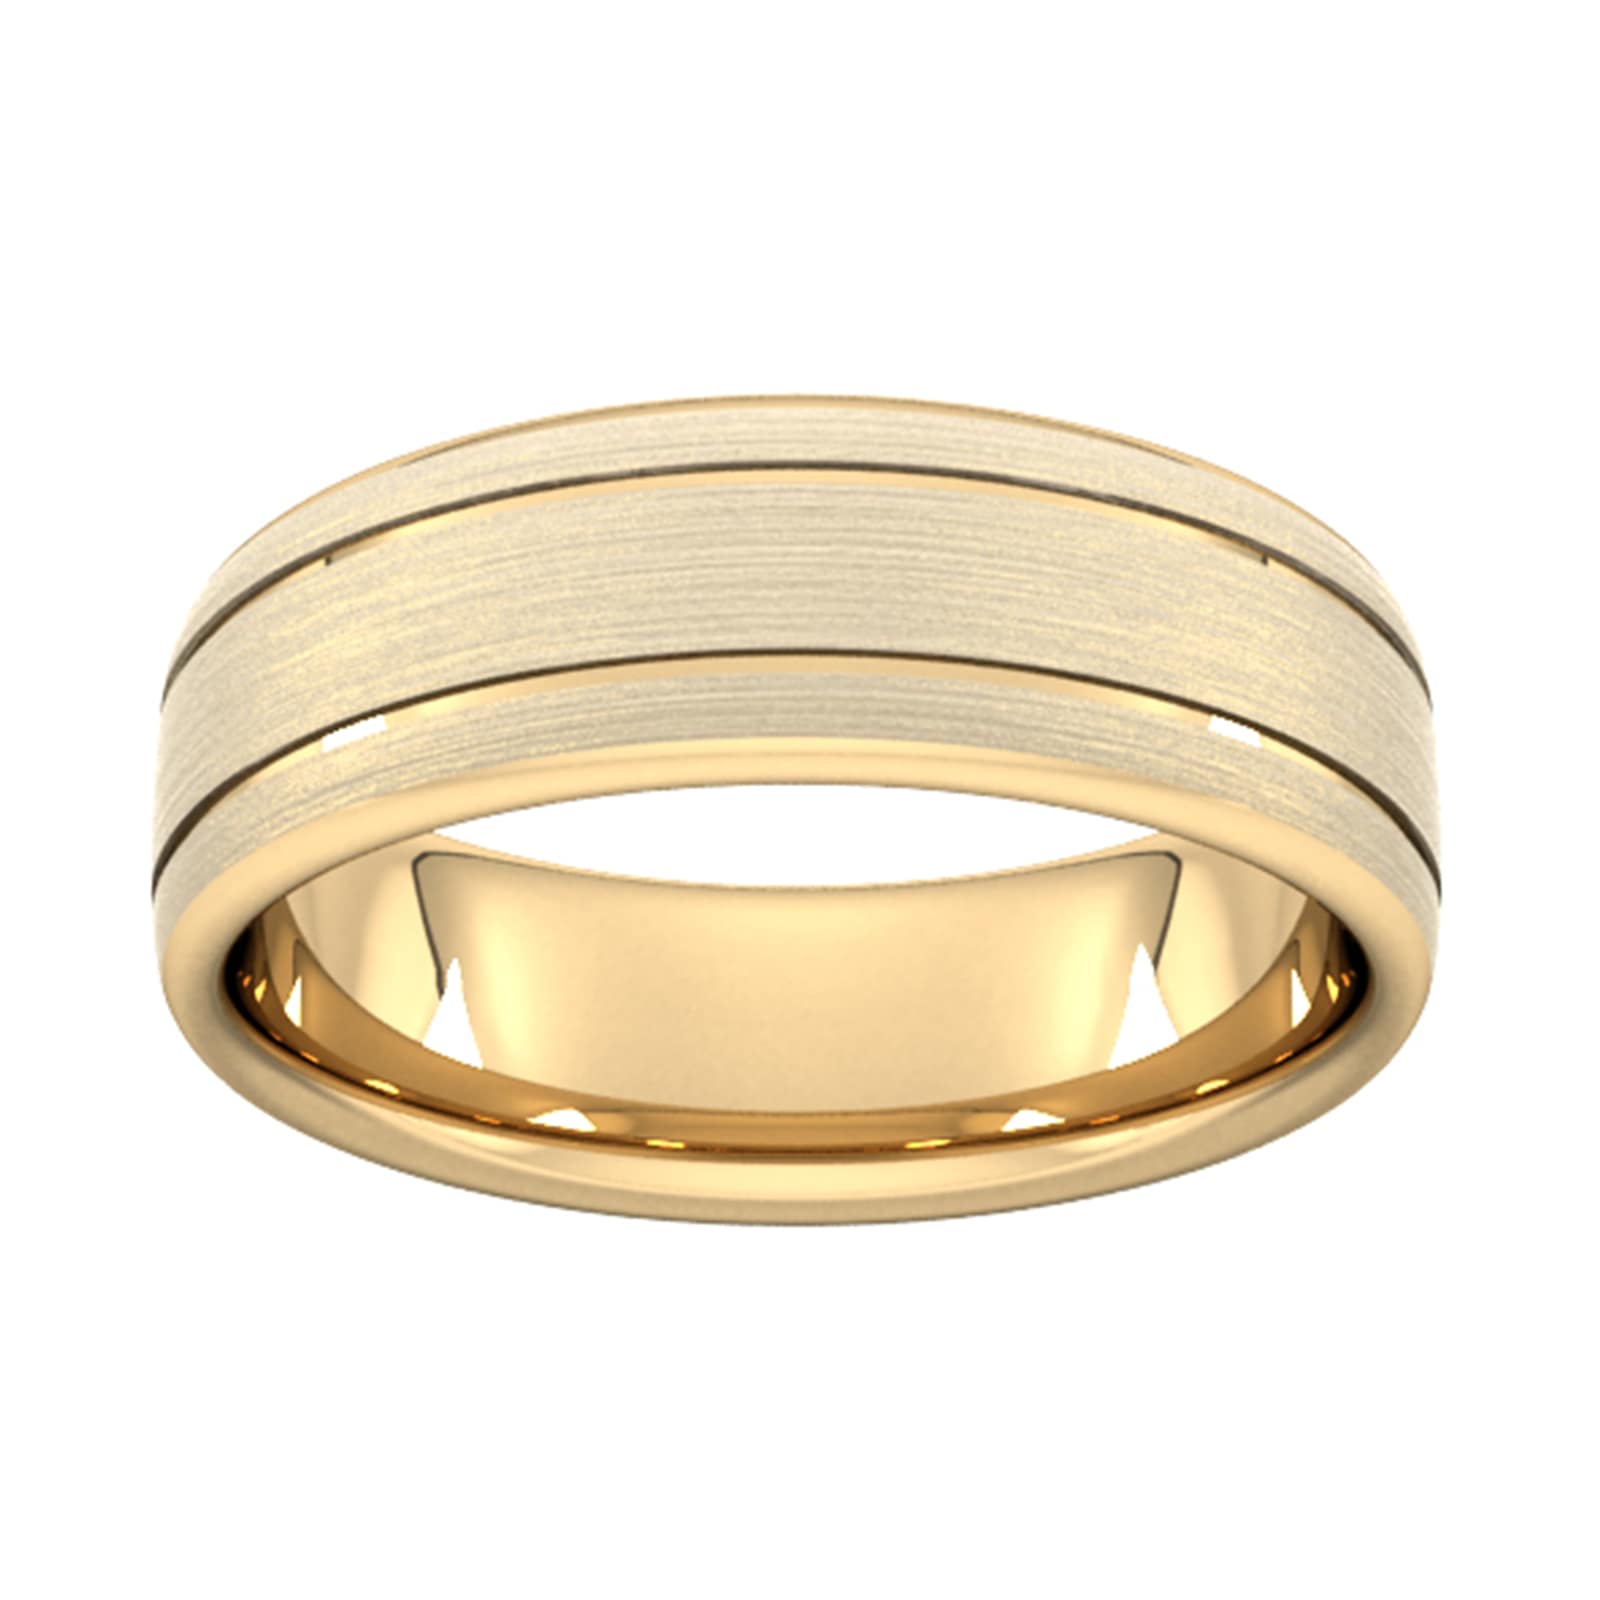 7mm D Shape Standard Matt Finish With Double Grooves Wedding Ring In 9 Carat Yellow Gold - Ring Size J